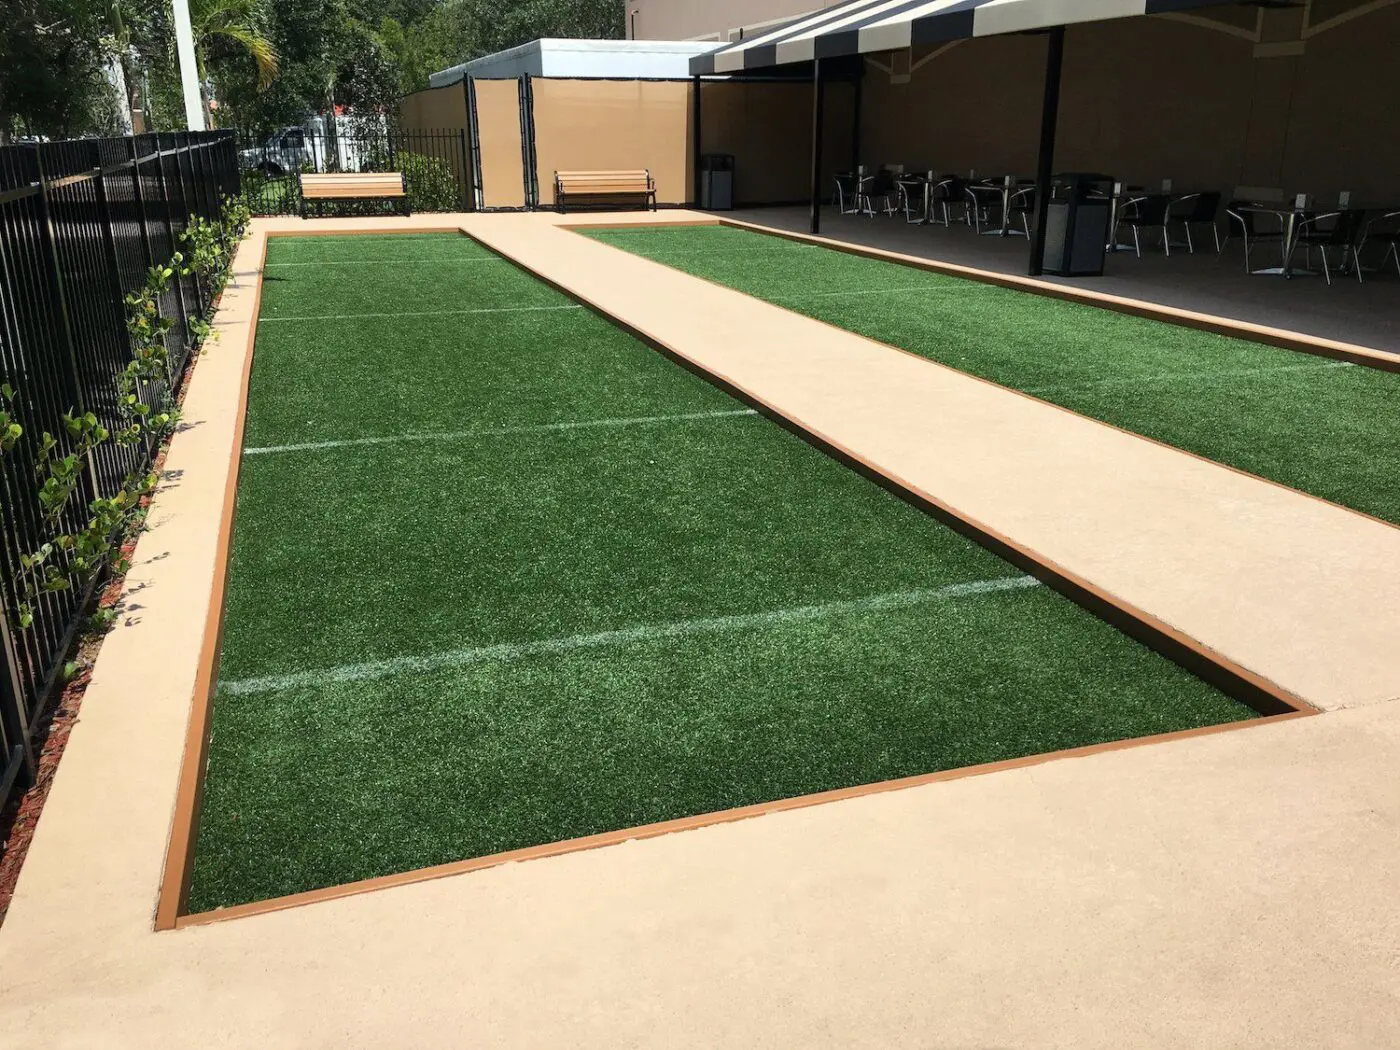 indoor astroturf bocce ball court installed by Coachella Valley Turf in Palm Springs CA